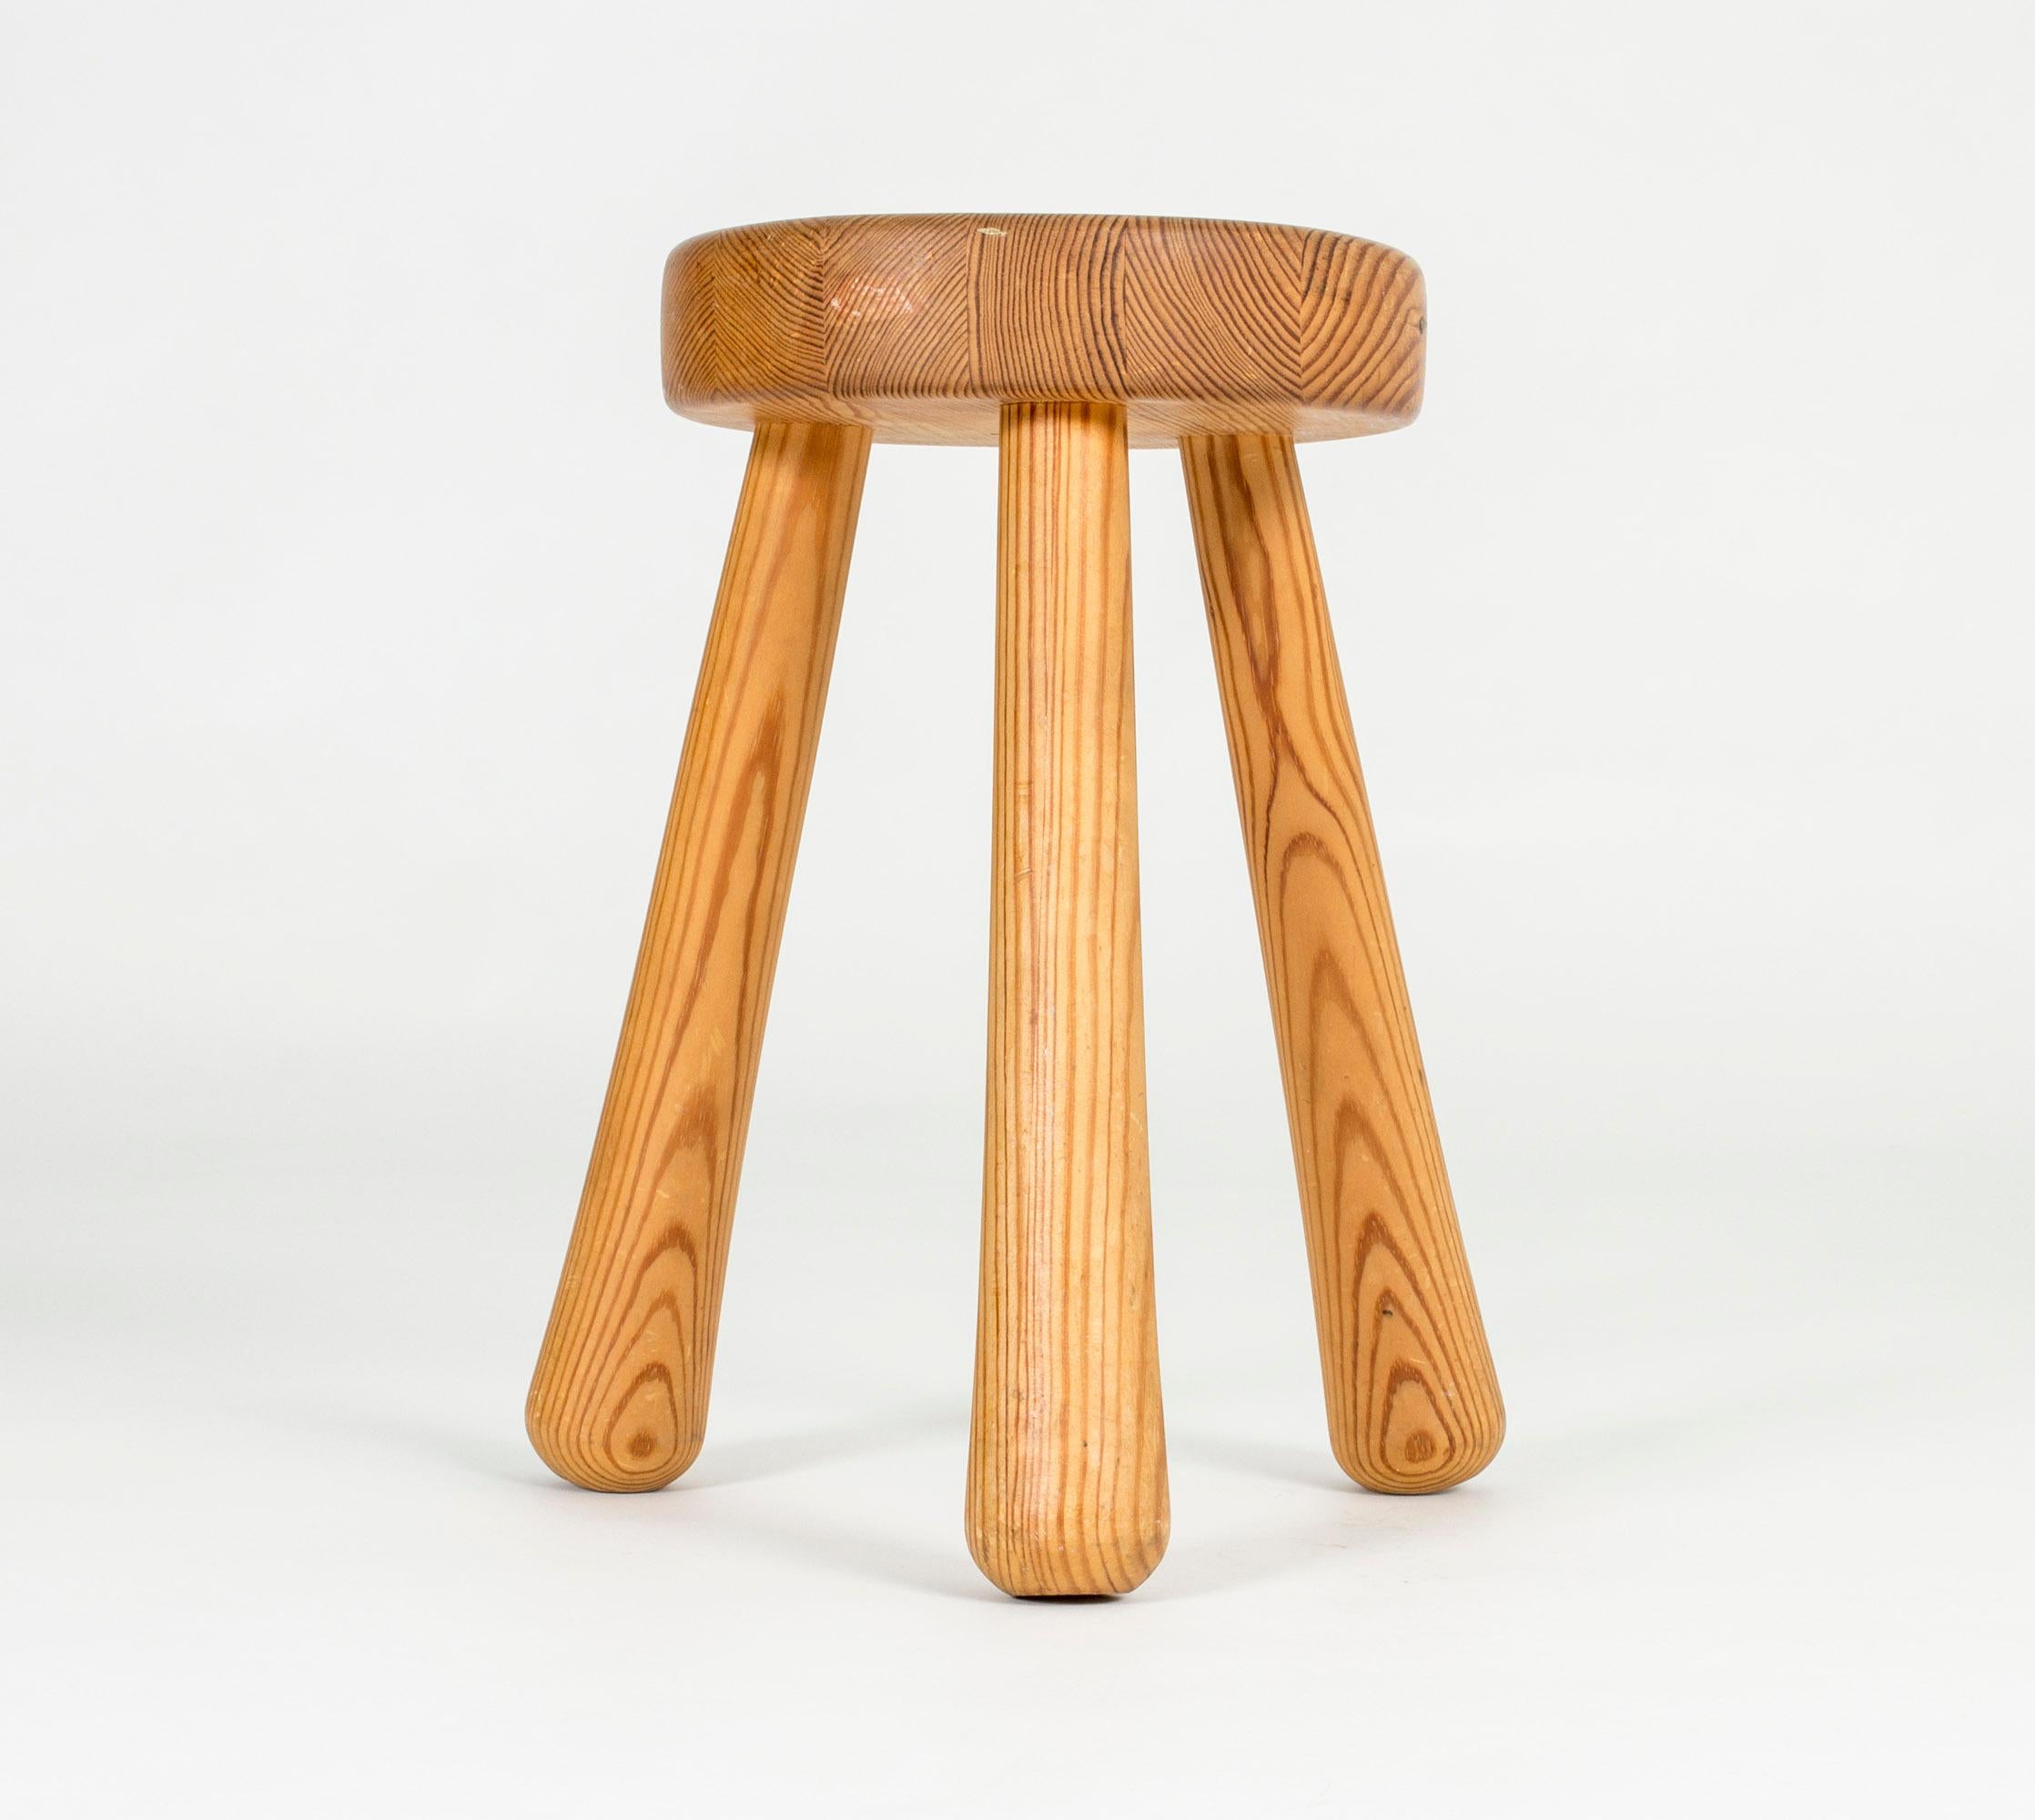 Mid-20th Century 1940s Wooden Stool by Ingvar Hildingsson